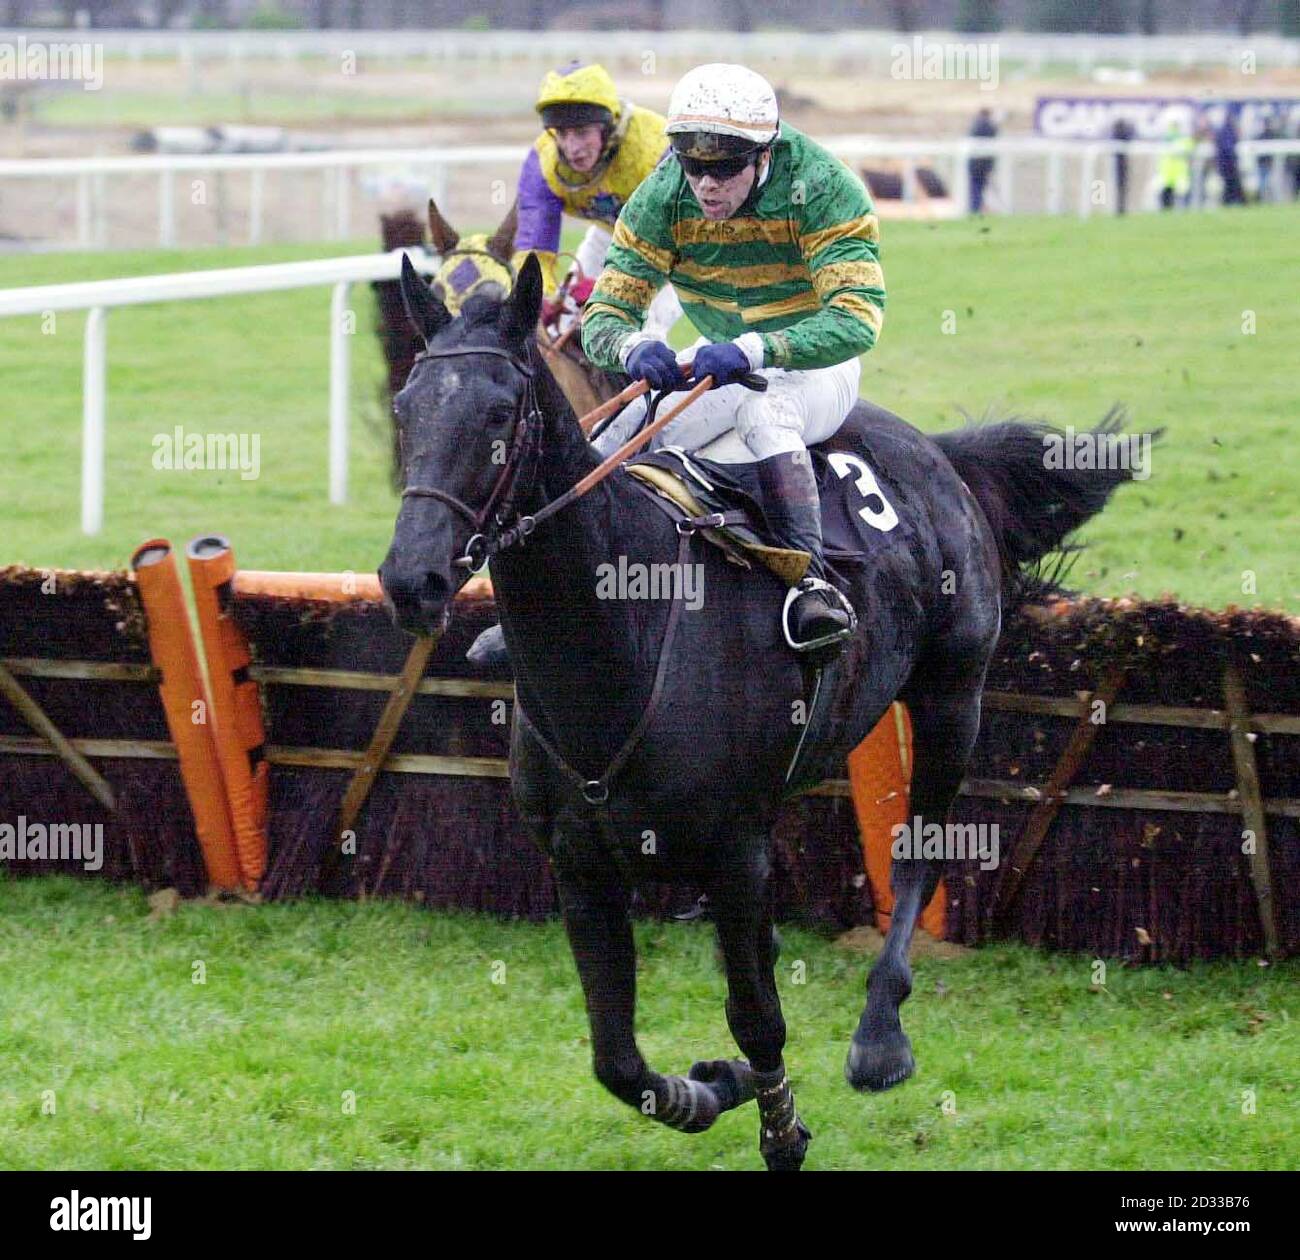 Krach ridden by Thierry Doumen, takes the last hurdle and goes on to win The John Lewis Memorial Novices' Hurdle Race, at Ascot.  Stock Photo